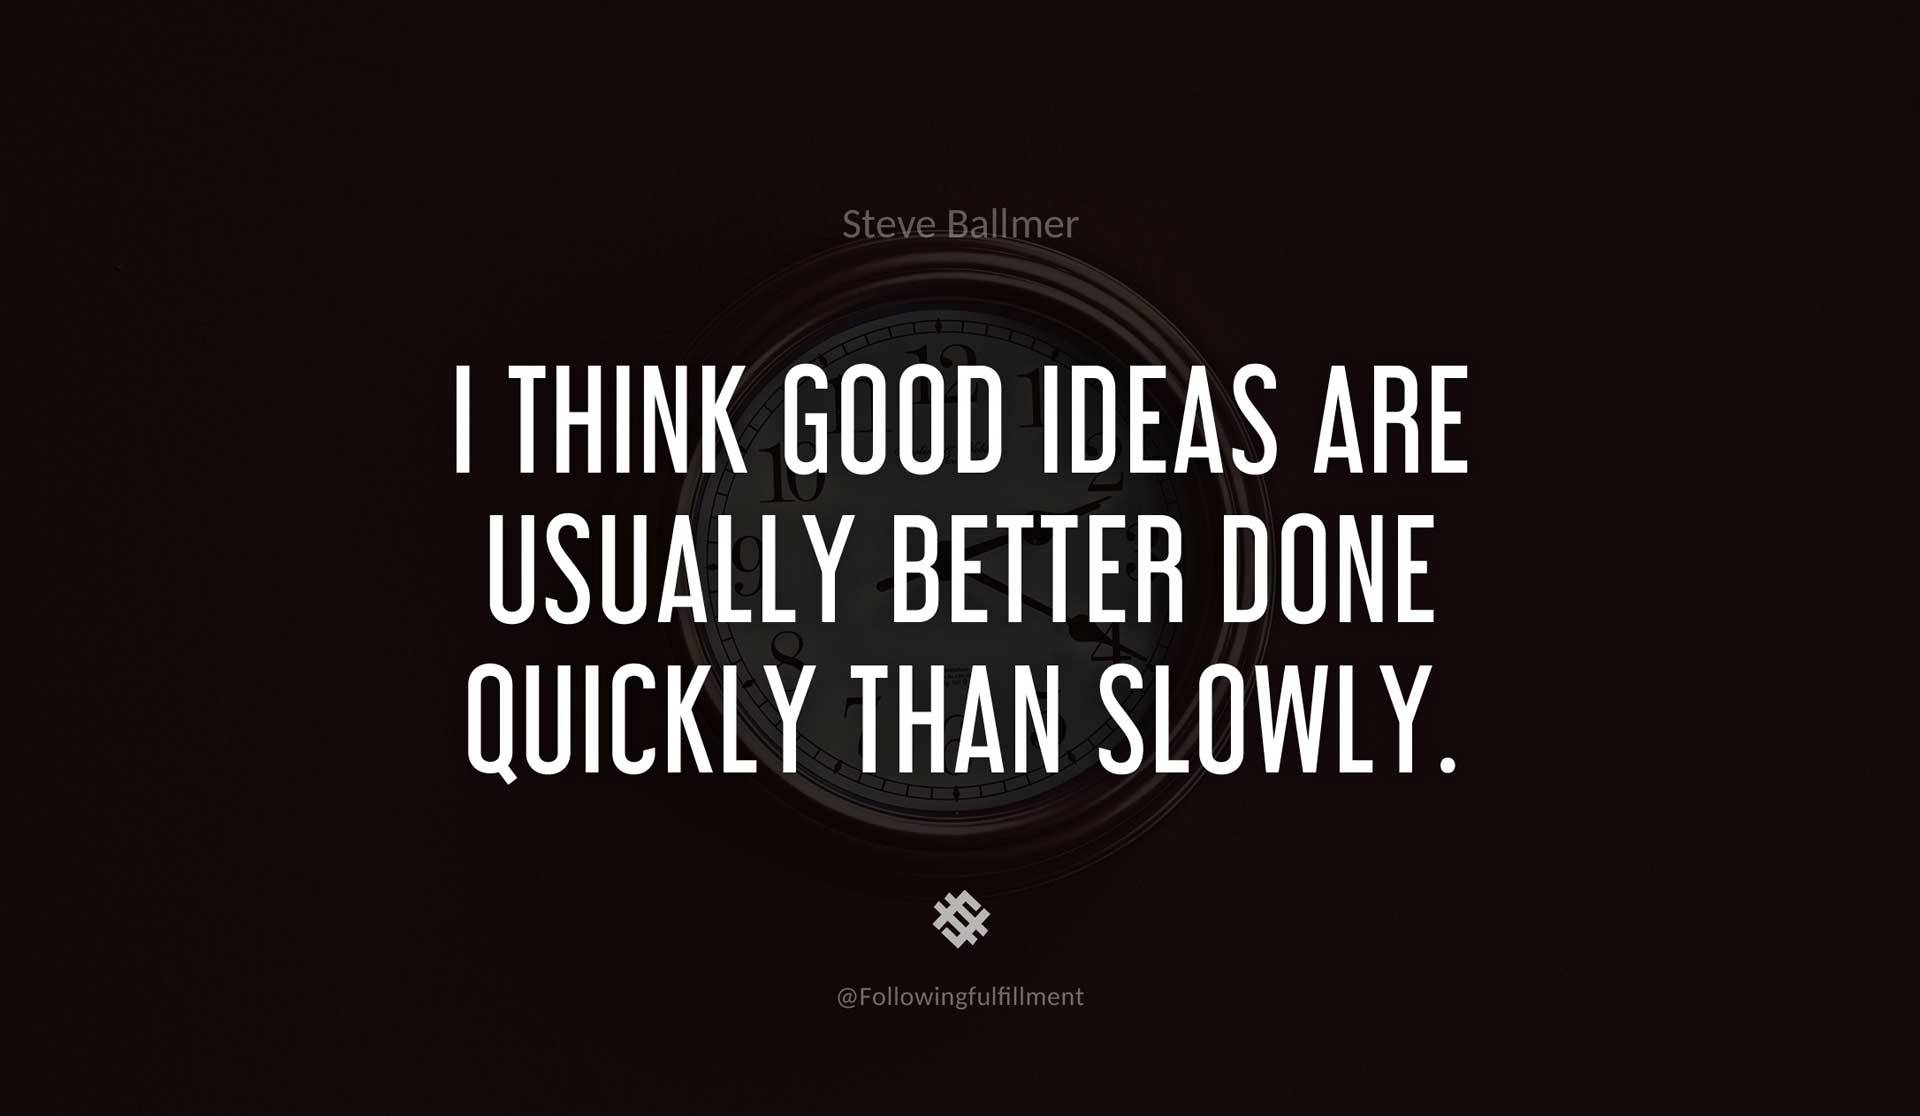 I-think-good-ideas-are-usually-better-done-quickly-than-slowly.-STEVE-BALLMER-Quote.jpg